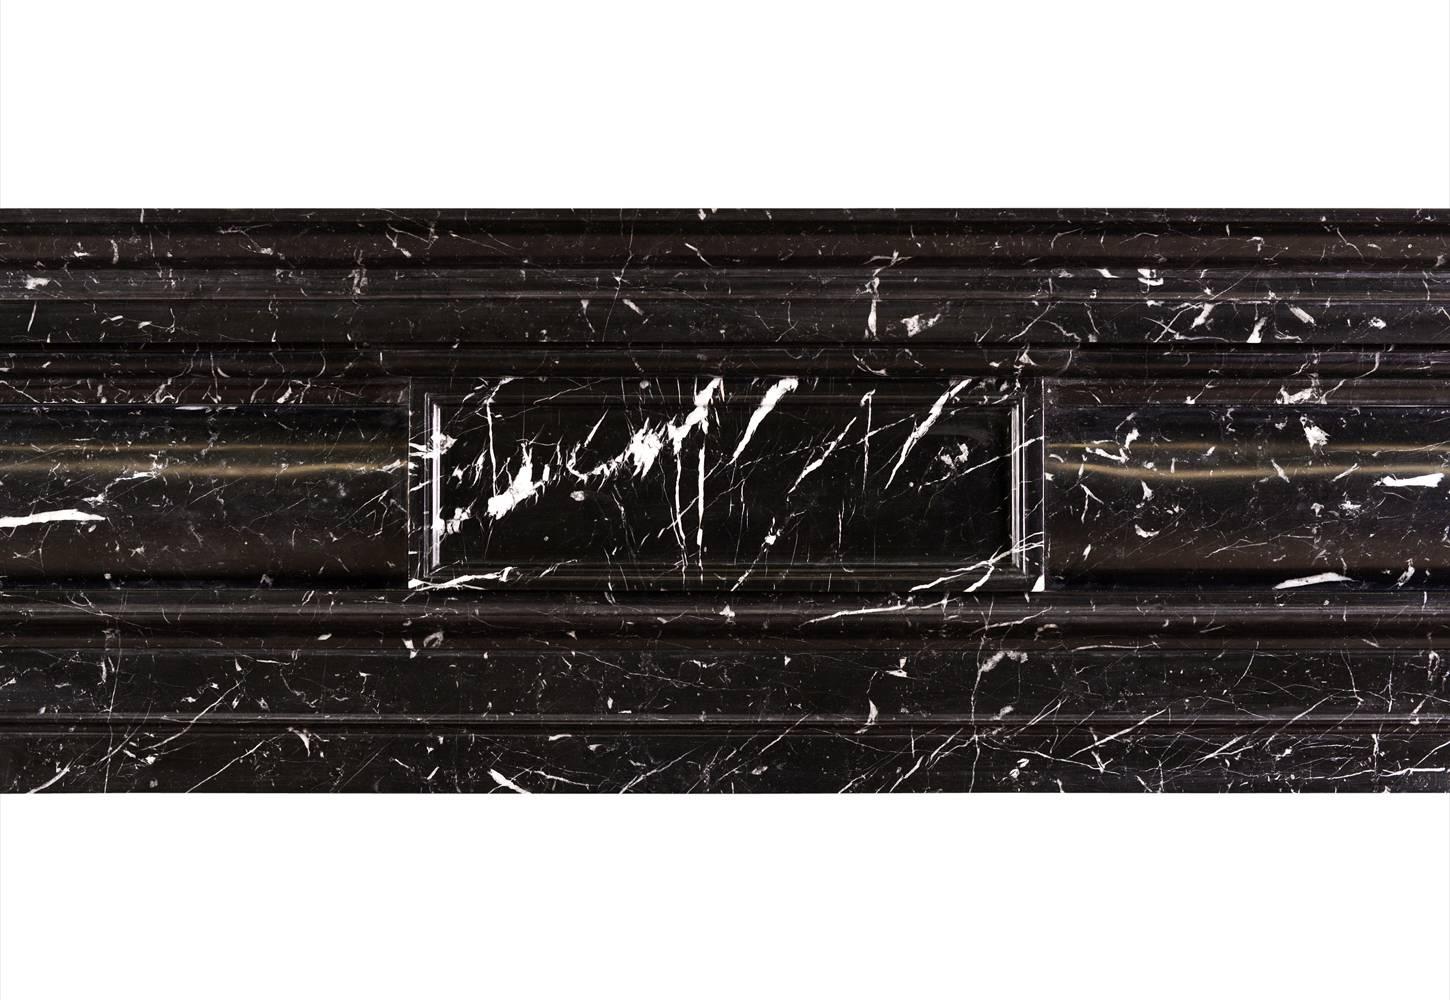 A stylish and well proportioned mid Georgian style fireplace in Nero Marquina marble. The barrel frieze with panelled centre and elegant moulded jambs and shelf. A striking black marble with white veining. A copy of an 18th century